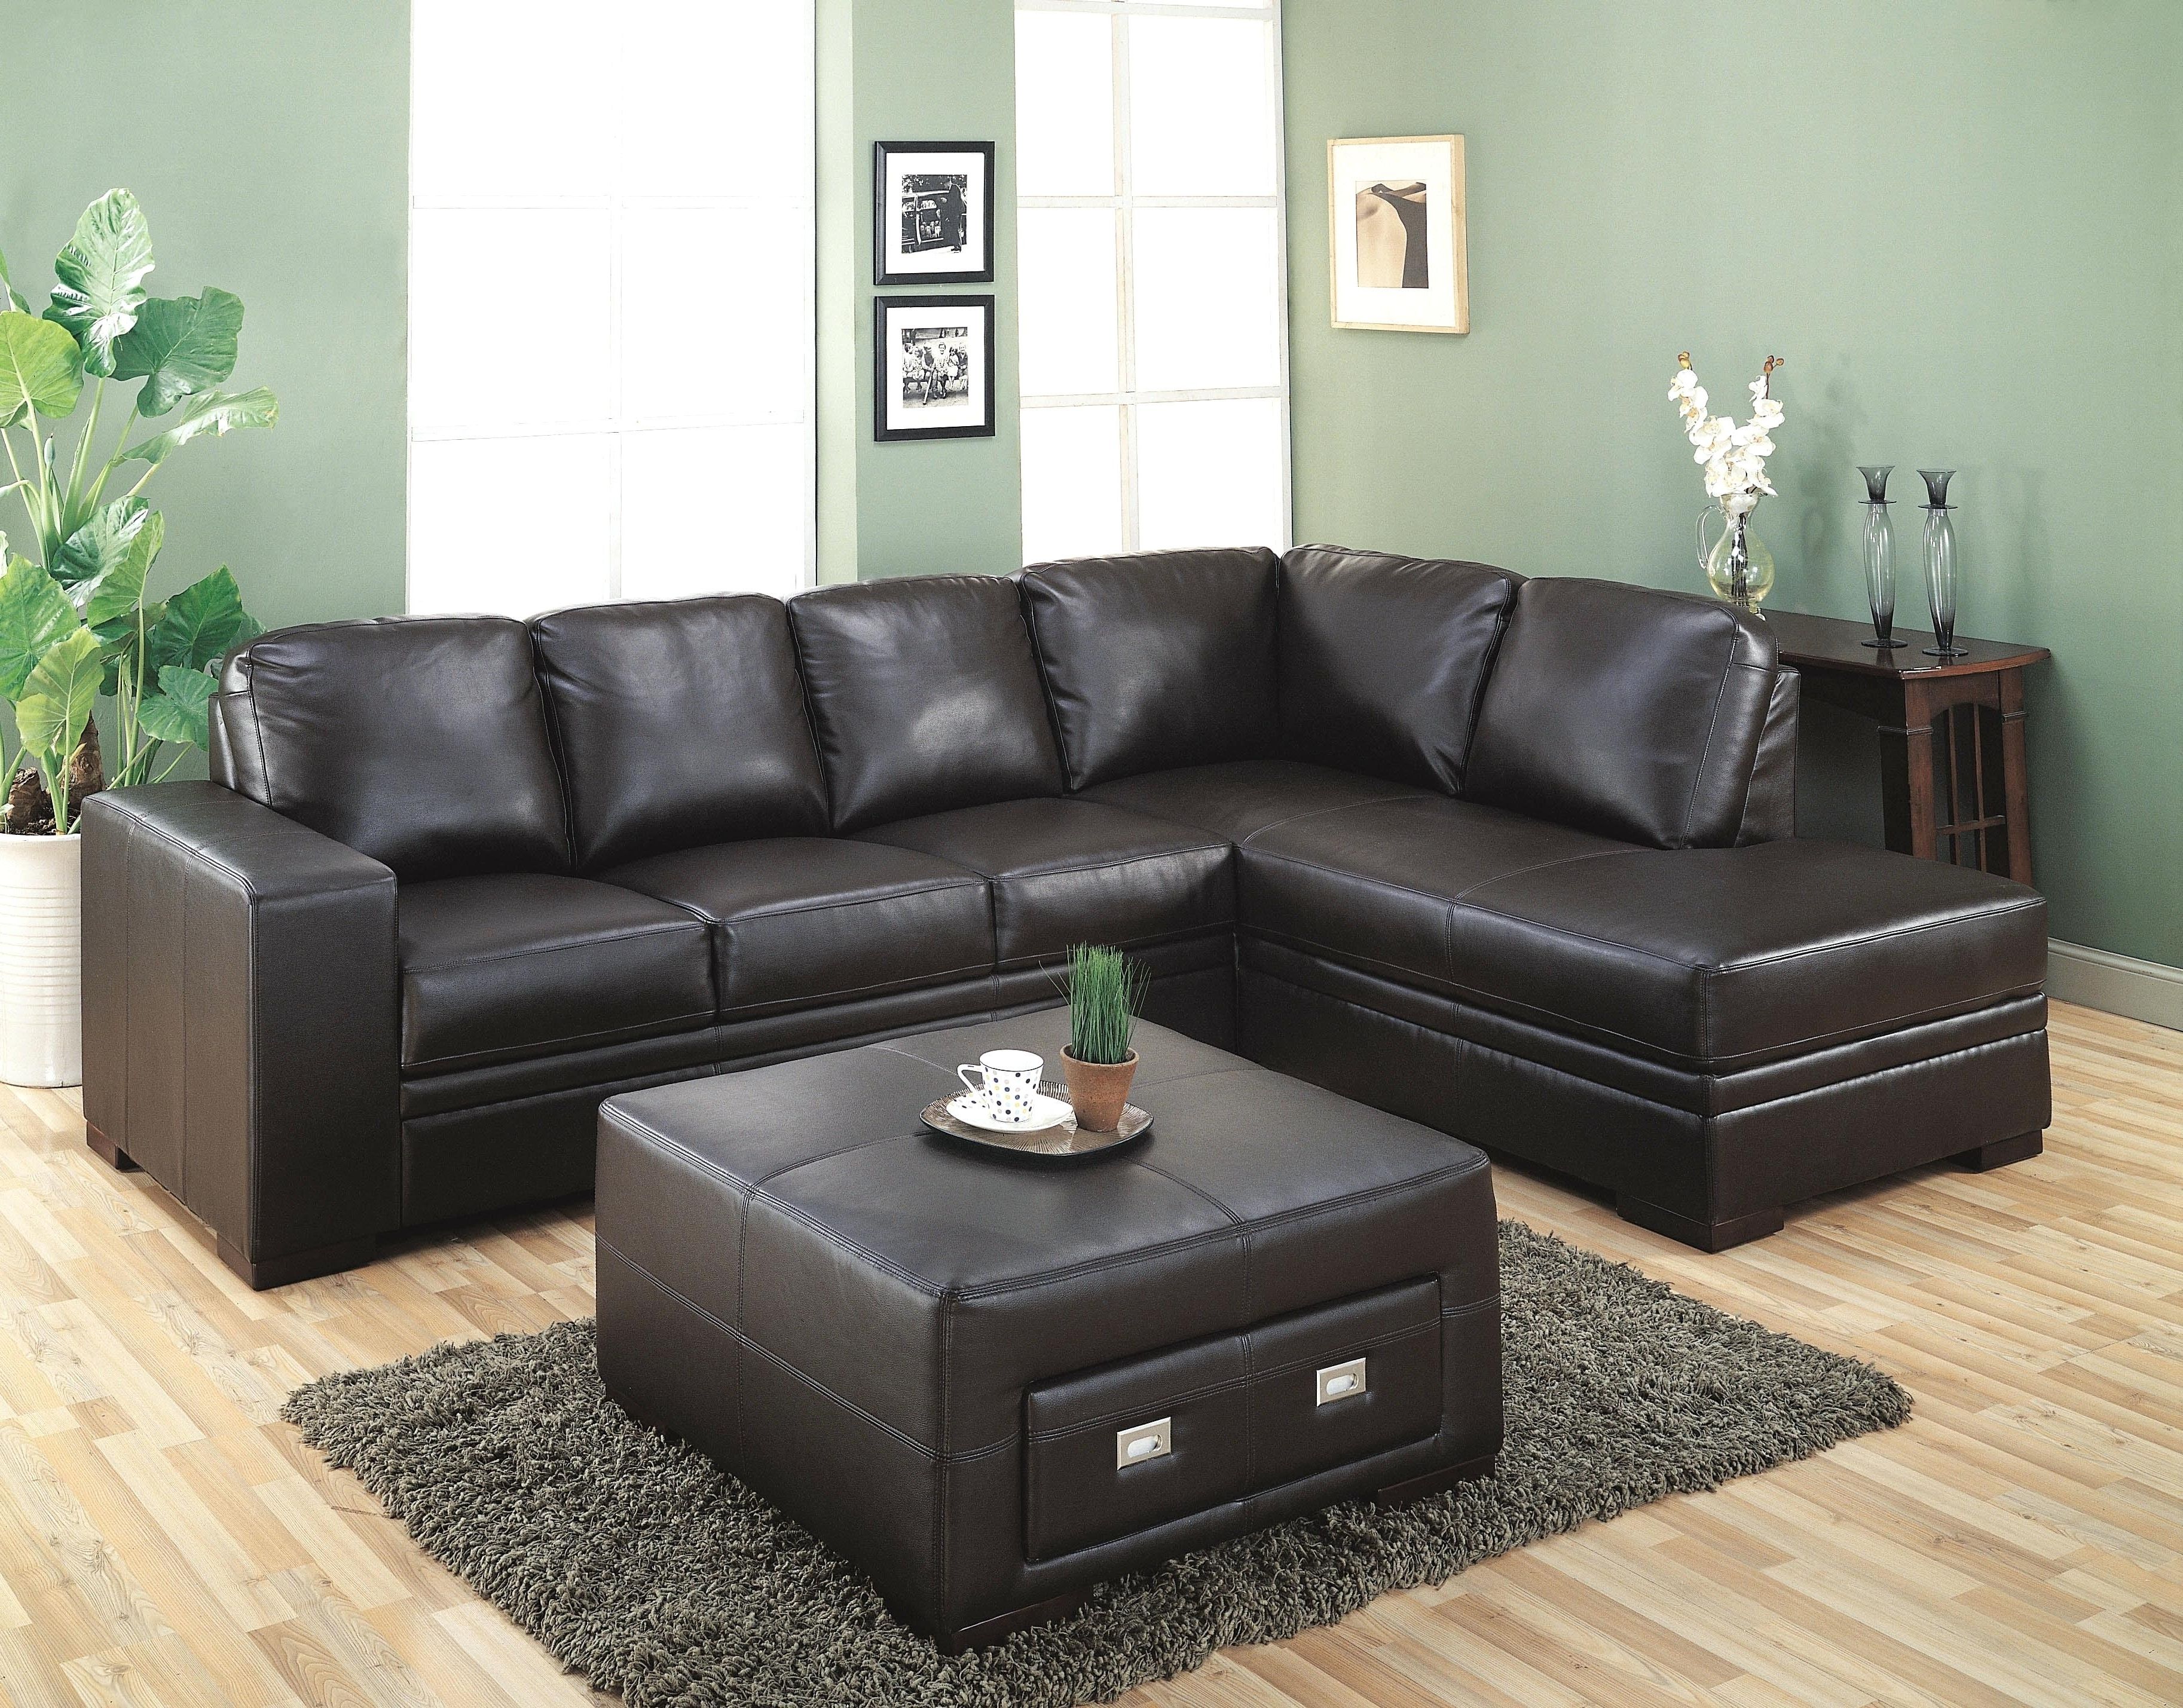 Most Recently Released Berkline Sectional Sofa Reviews Leather Sofas – Poikilothermia With Regard To Berkline Sectional Sofas (Photo 10 of 20)